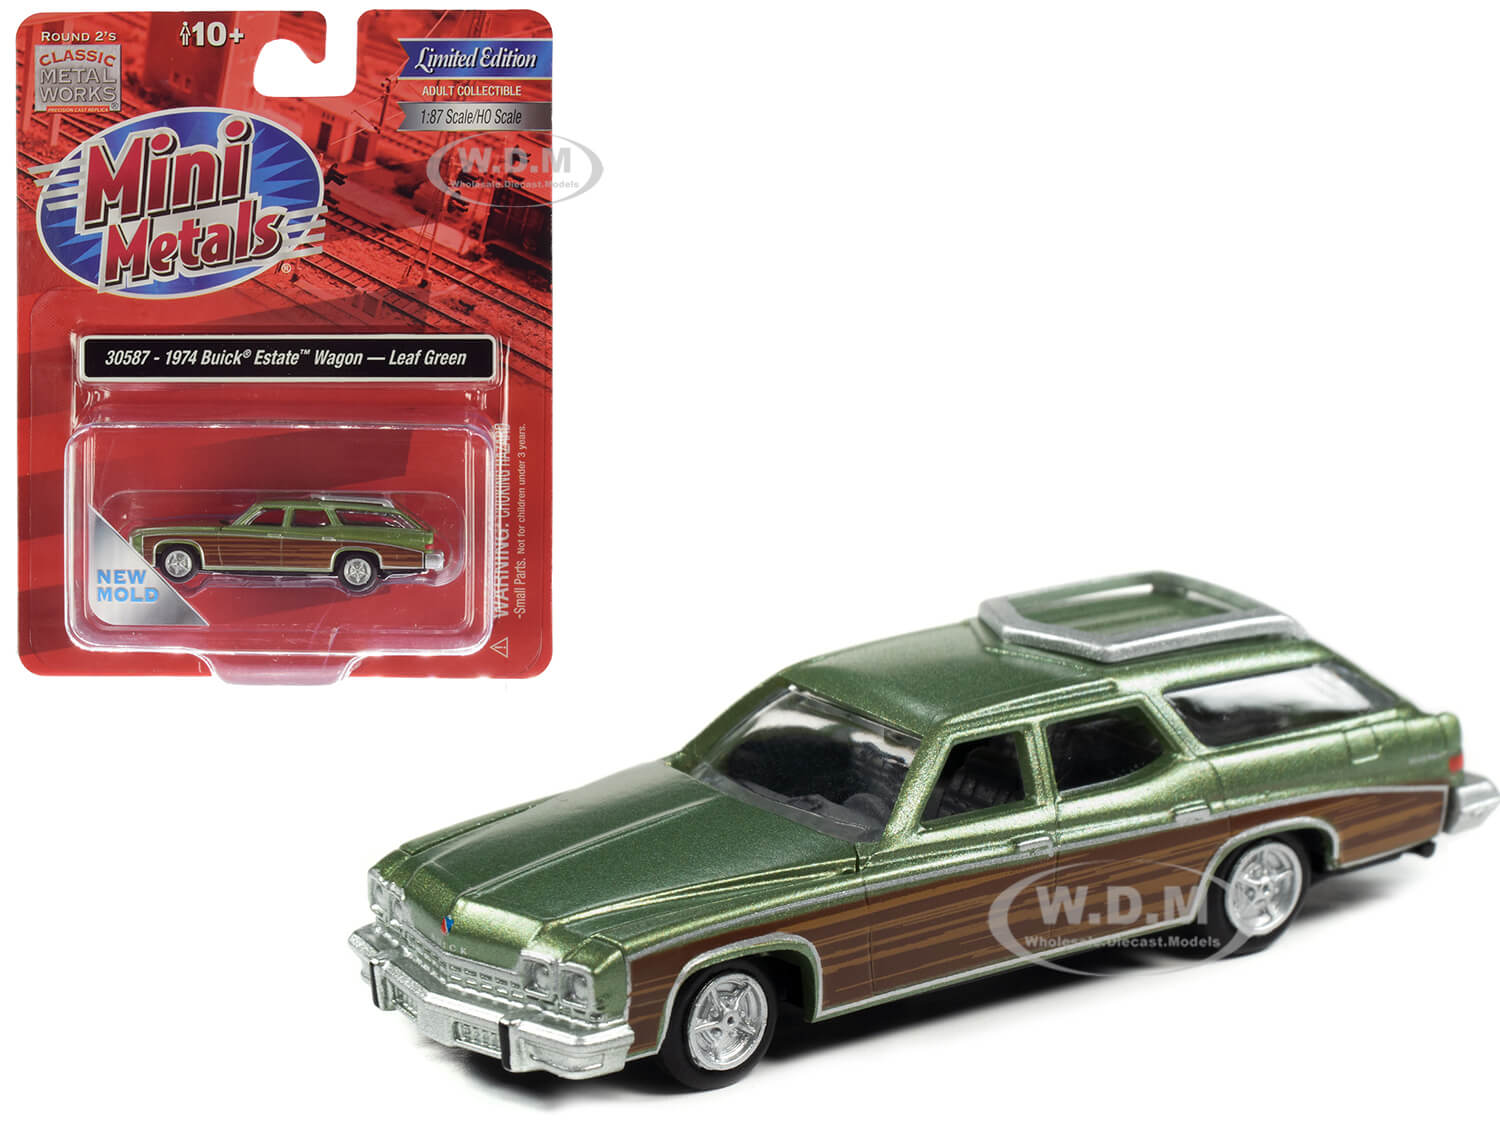 1974 Buick Estate Wagon Leaf Green Metallic With Woodgrain Sides 1/87 (ho) Scale Model Car By Classic Metal Works